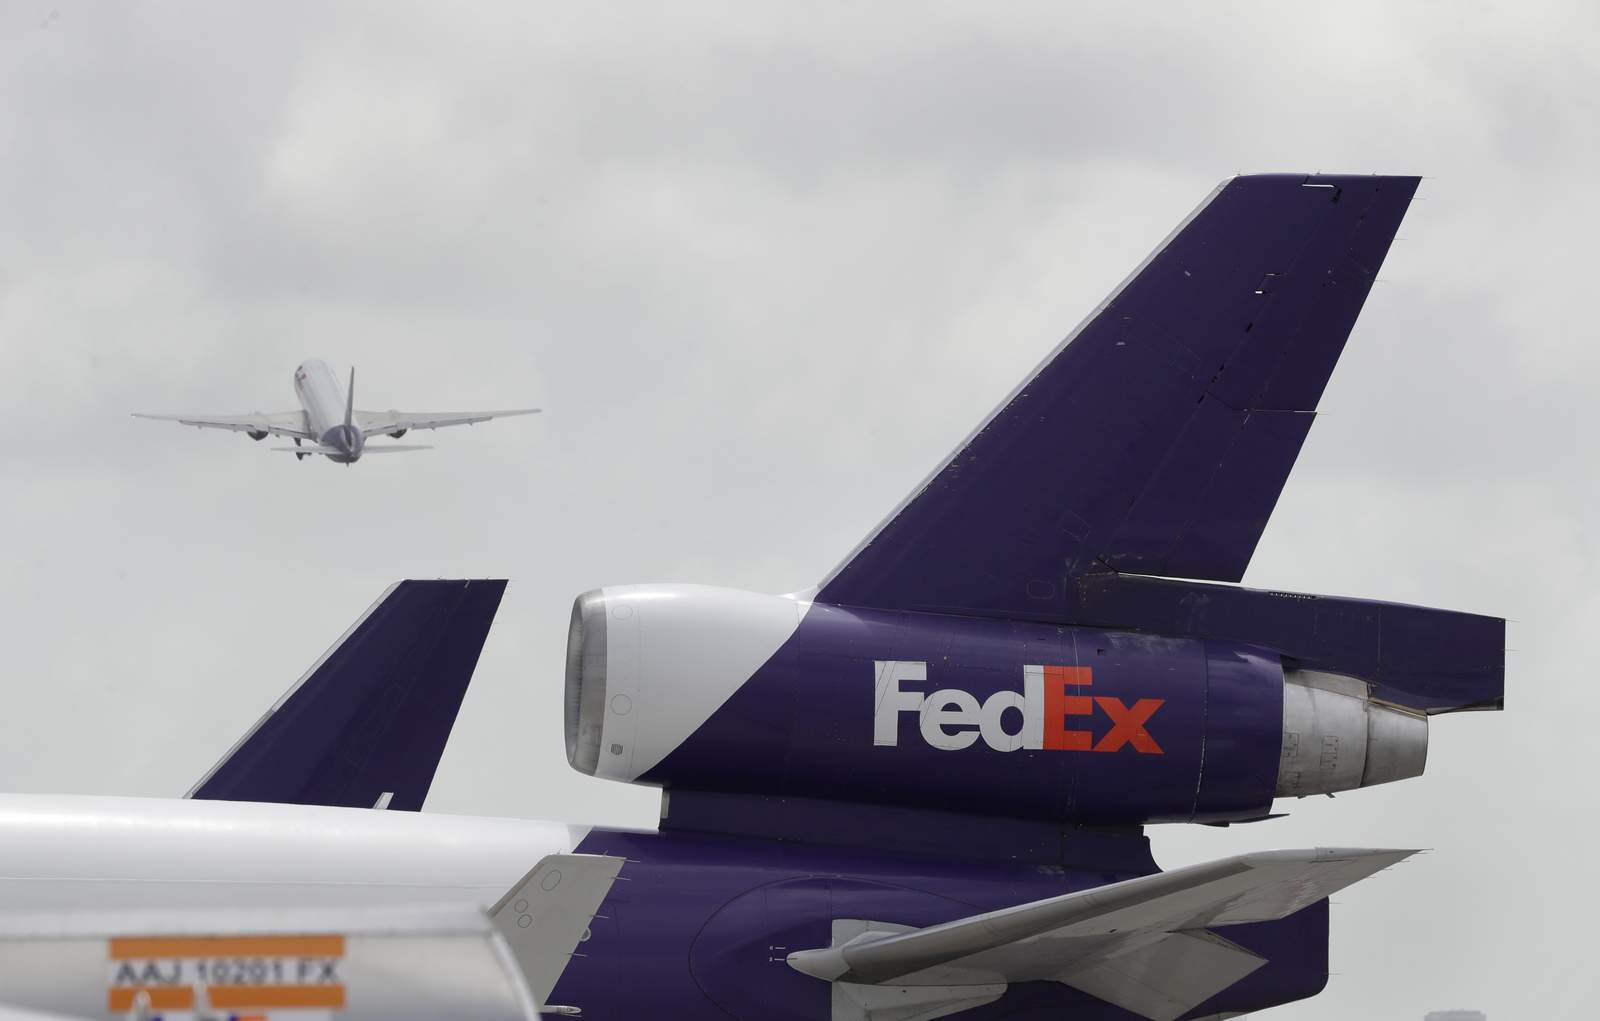 FedEx to cut up to 6,300 jobs in Europe over next 18 months